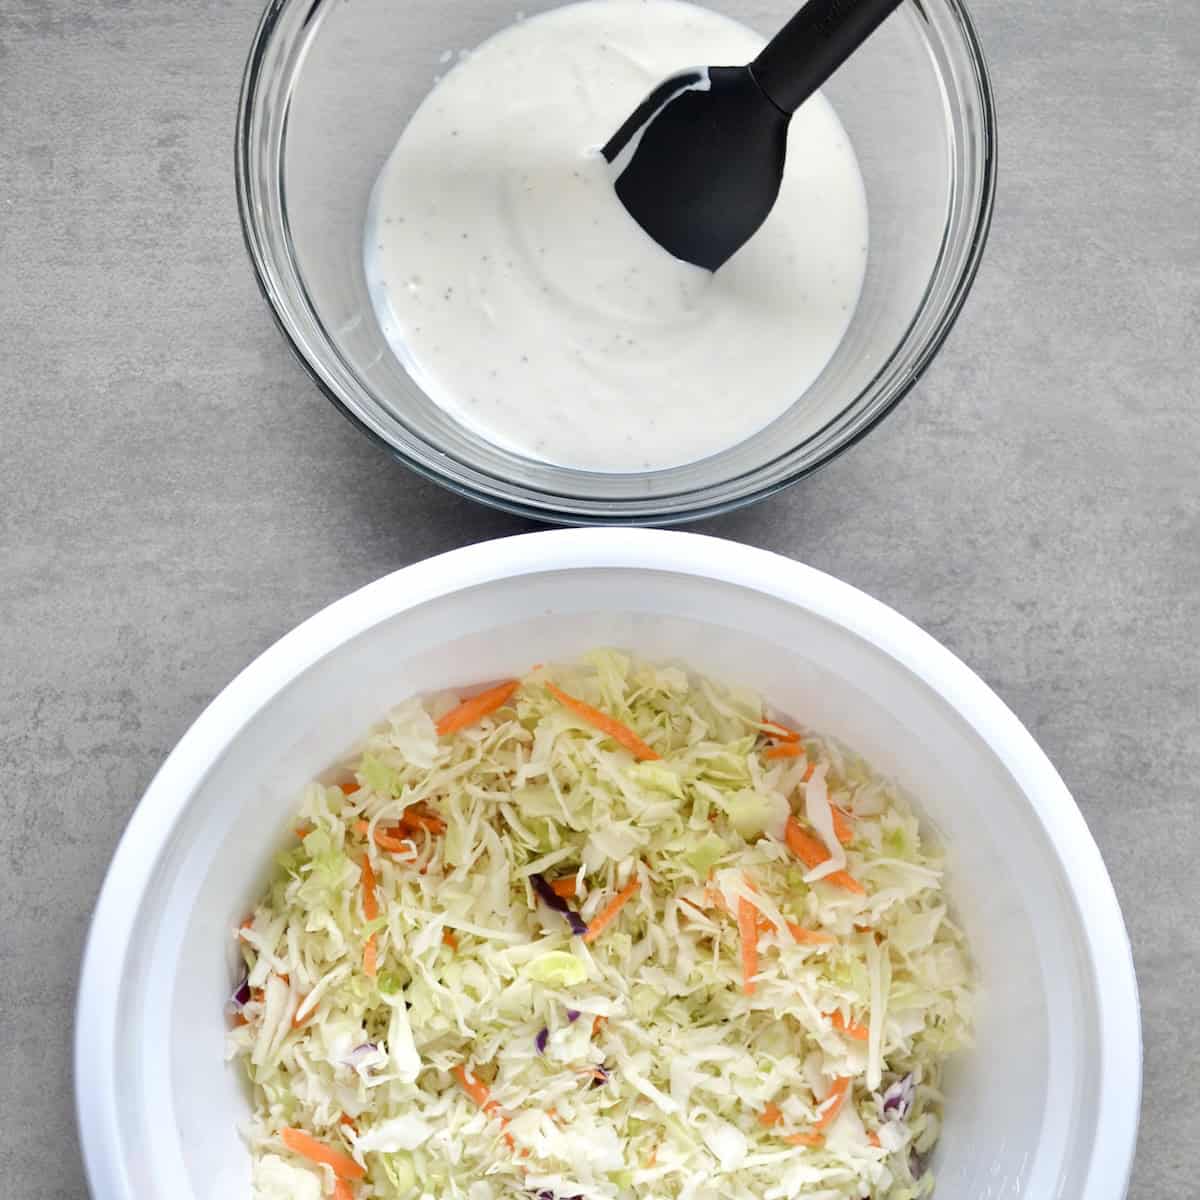 Coleslaw dressing and shredded cabbage